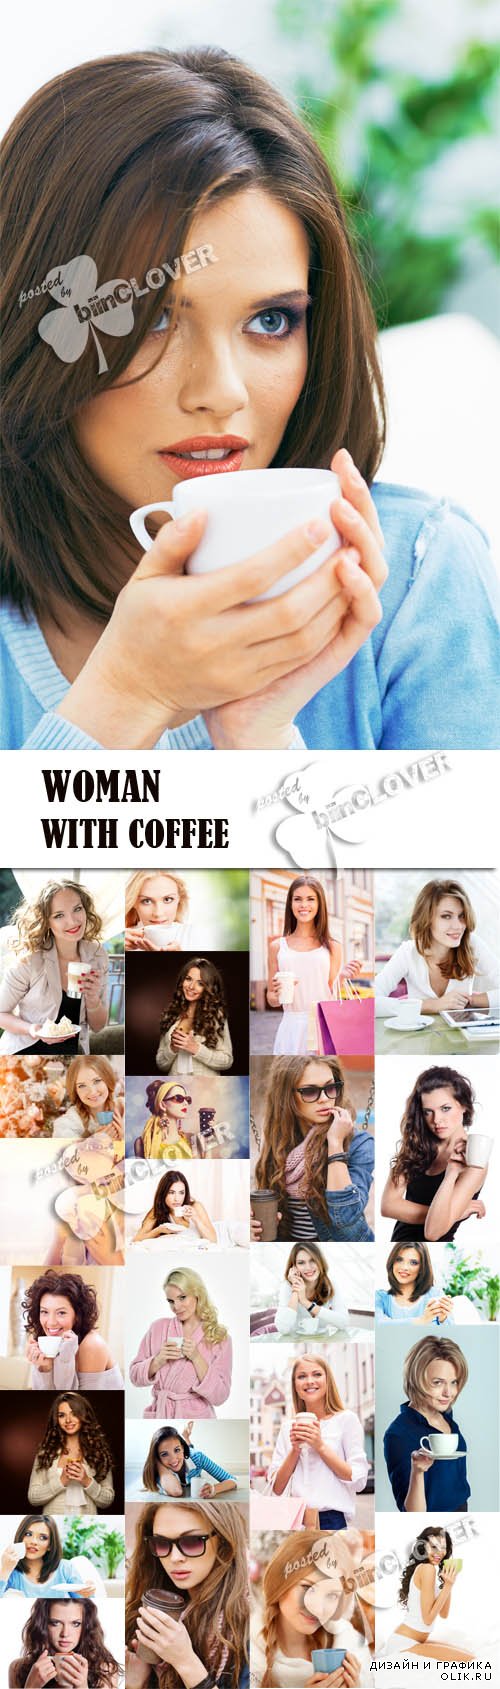 Woman  with coffee 0592